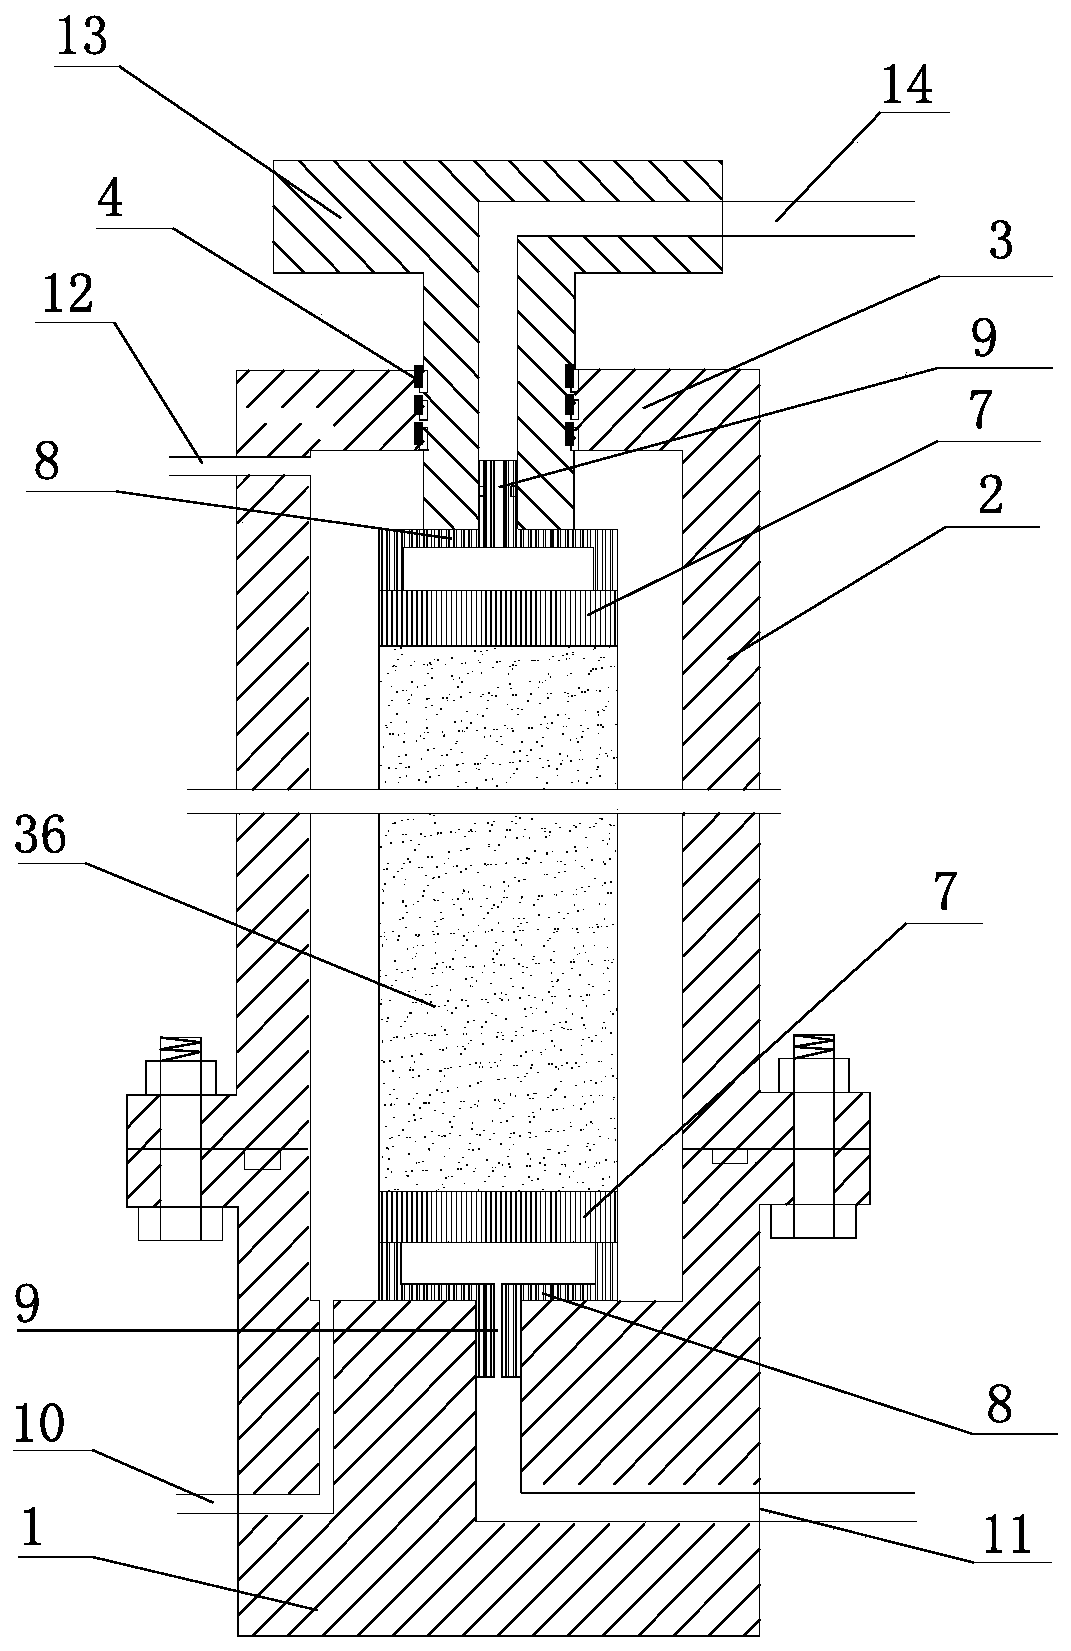 Post-peak fractured rock triaxial slurry permeability test system and method